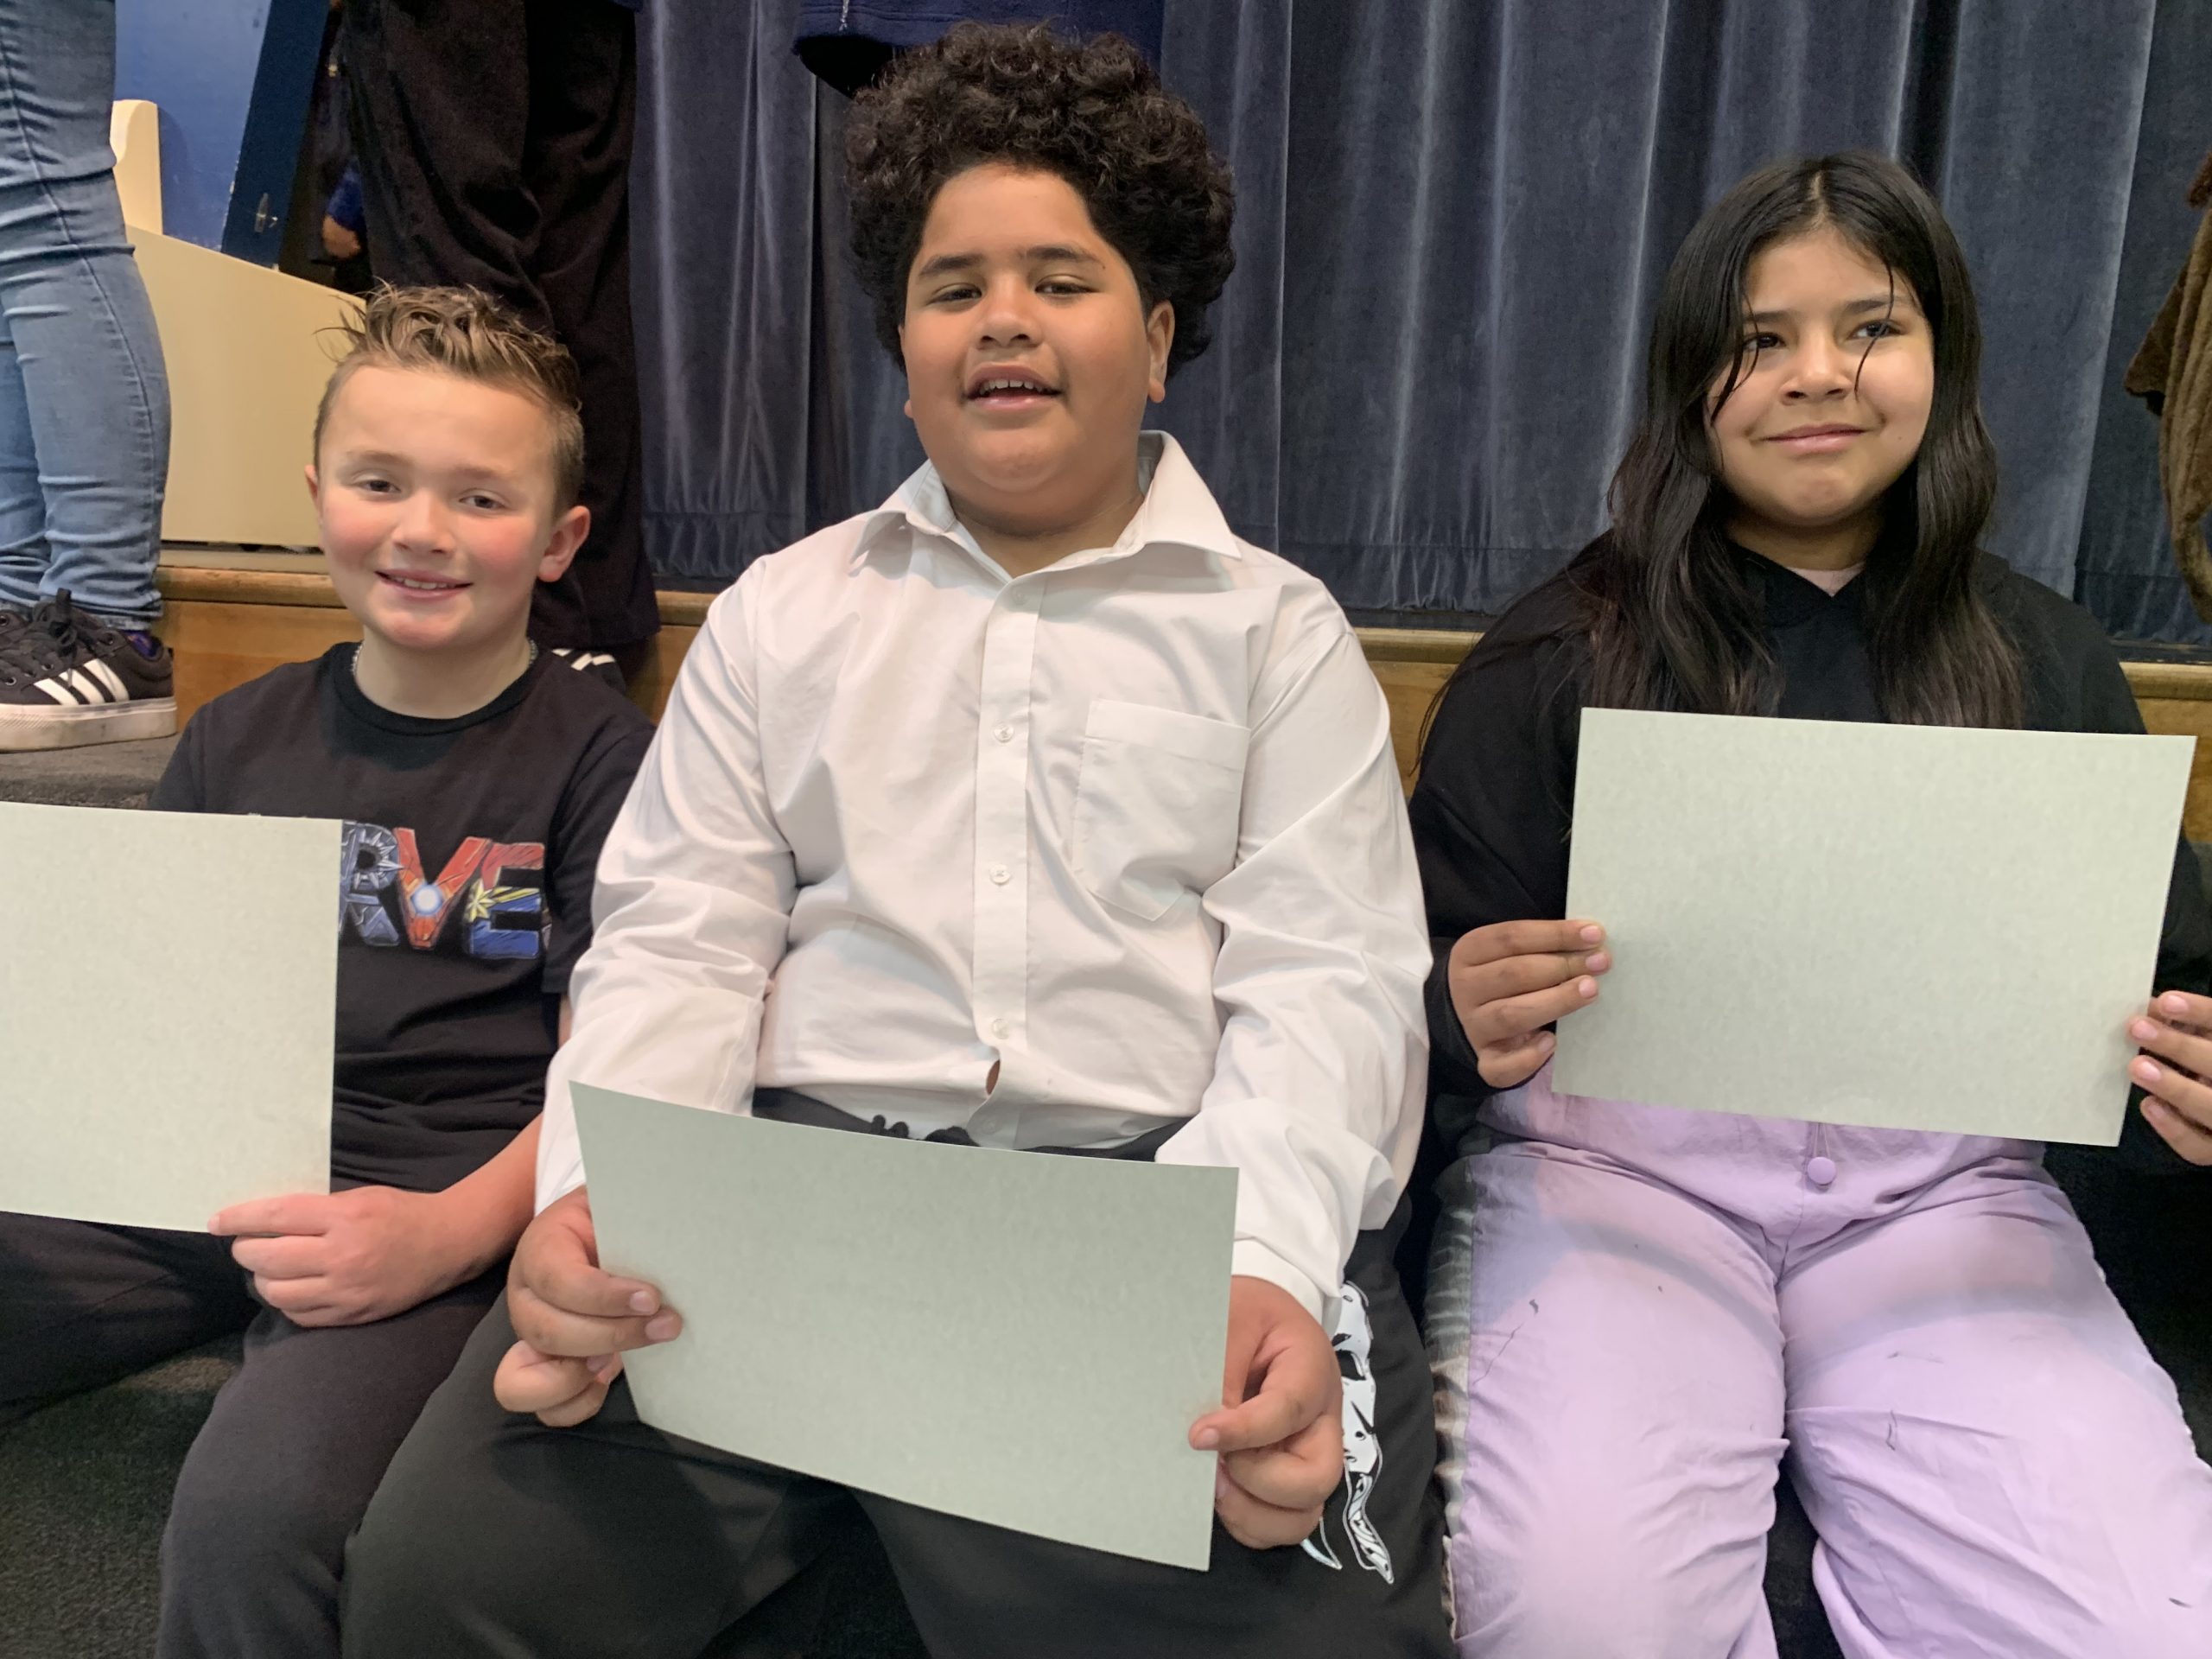 Our 4th grade awards recipients for February